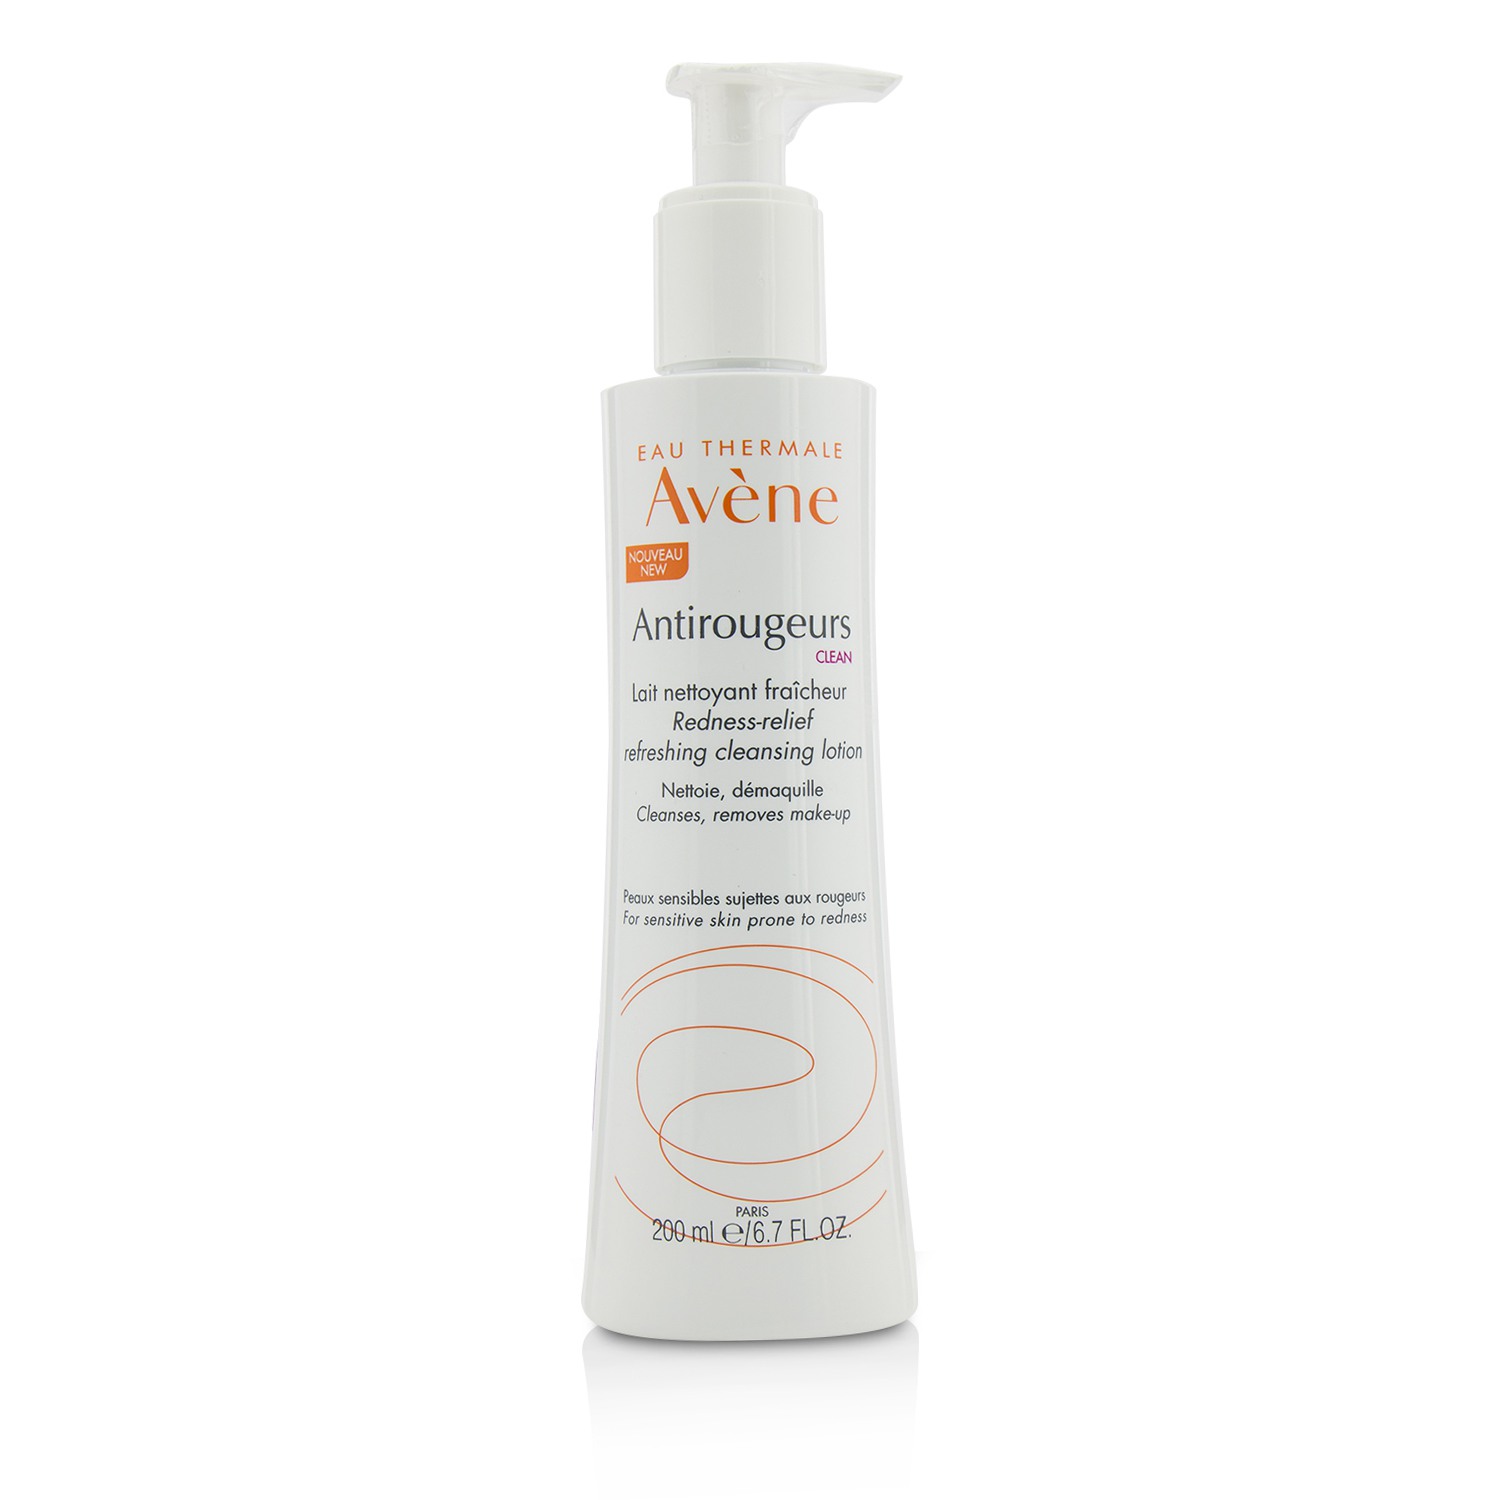 Antirougeurs Clean Redness-Relief Refreshing Cleansing Lotion - For Sensitive Skin Prone to Redness Avene Image